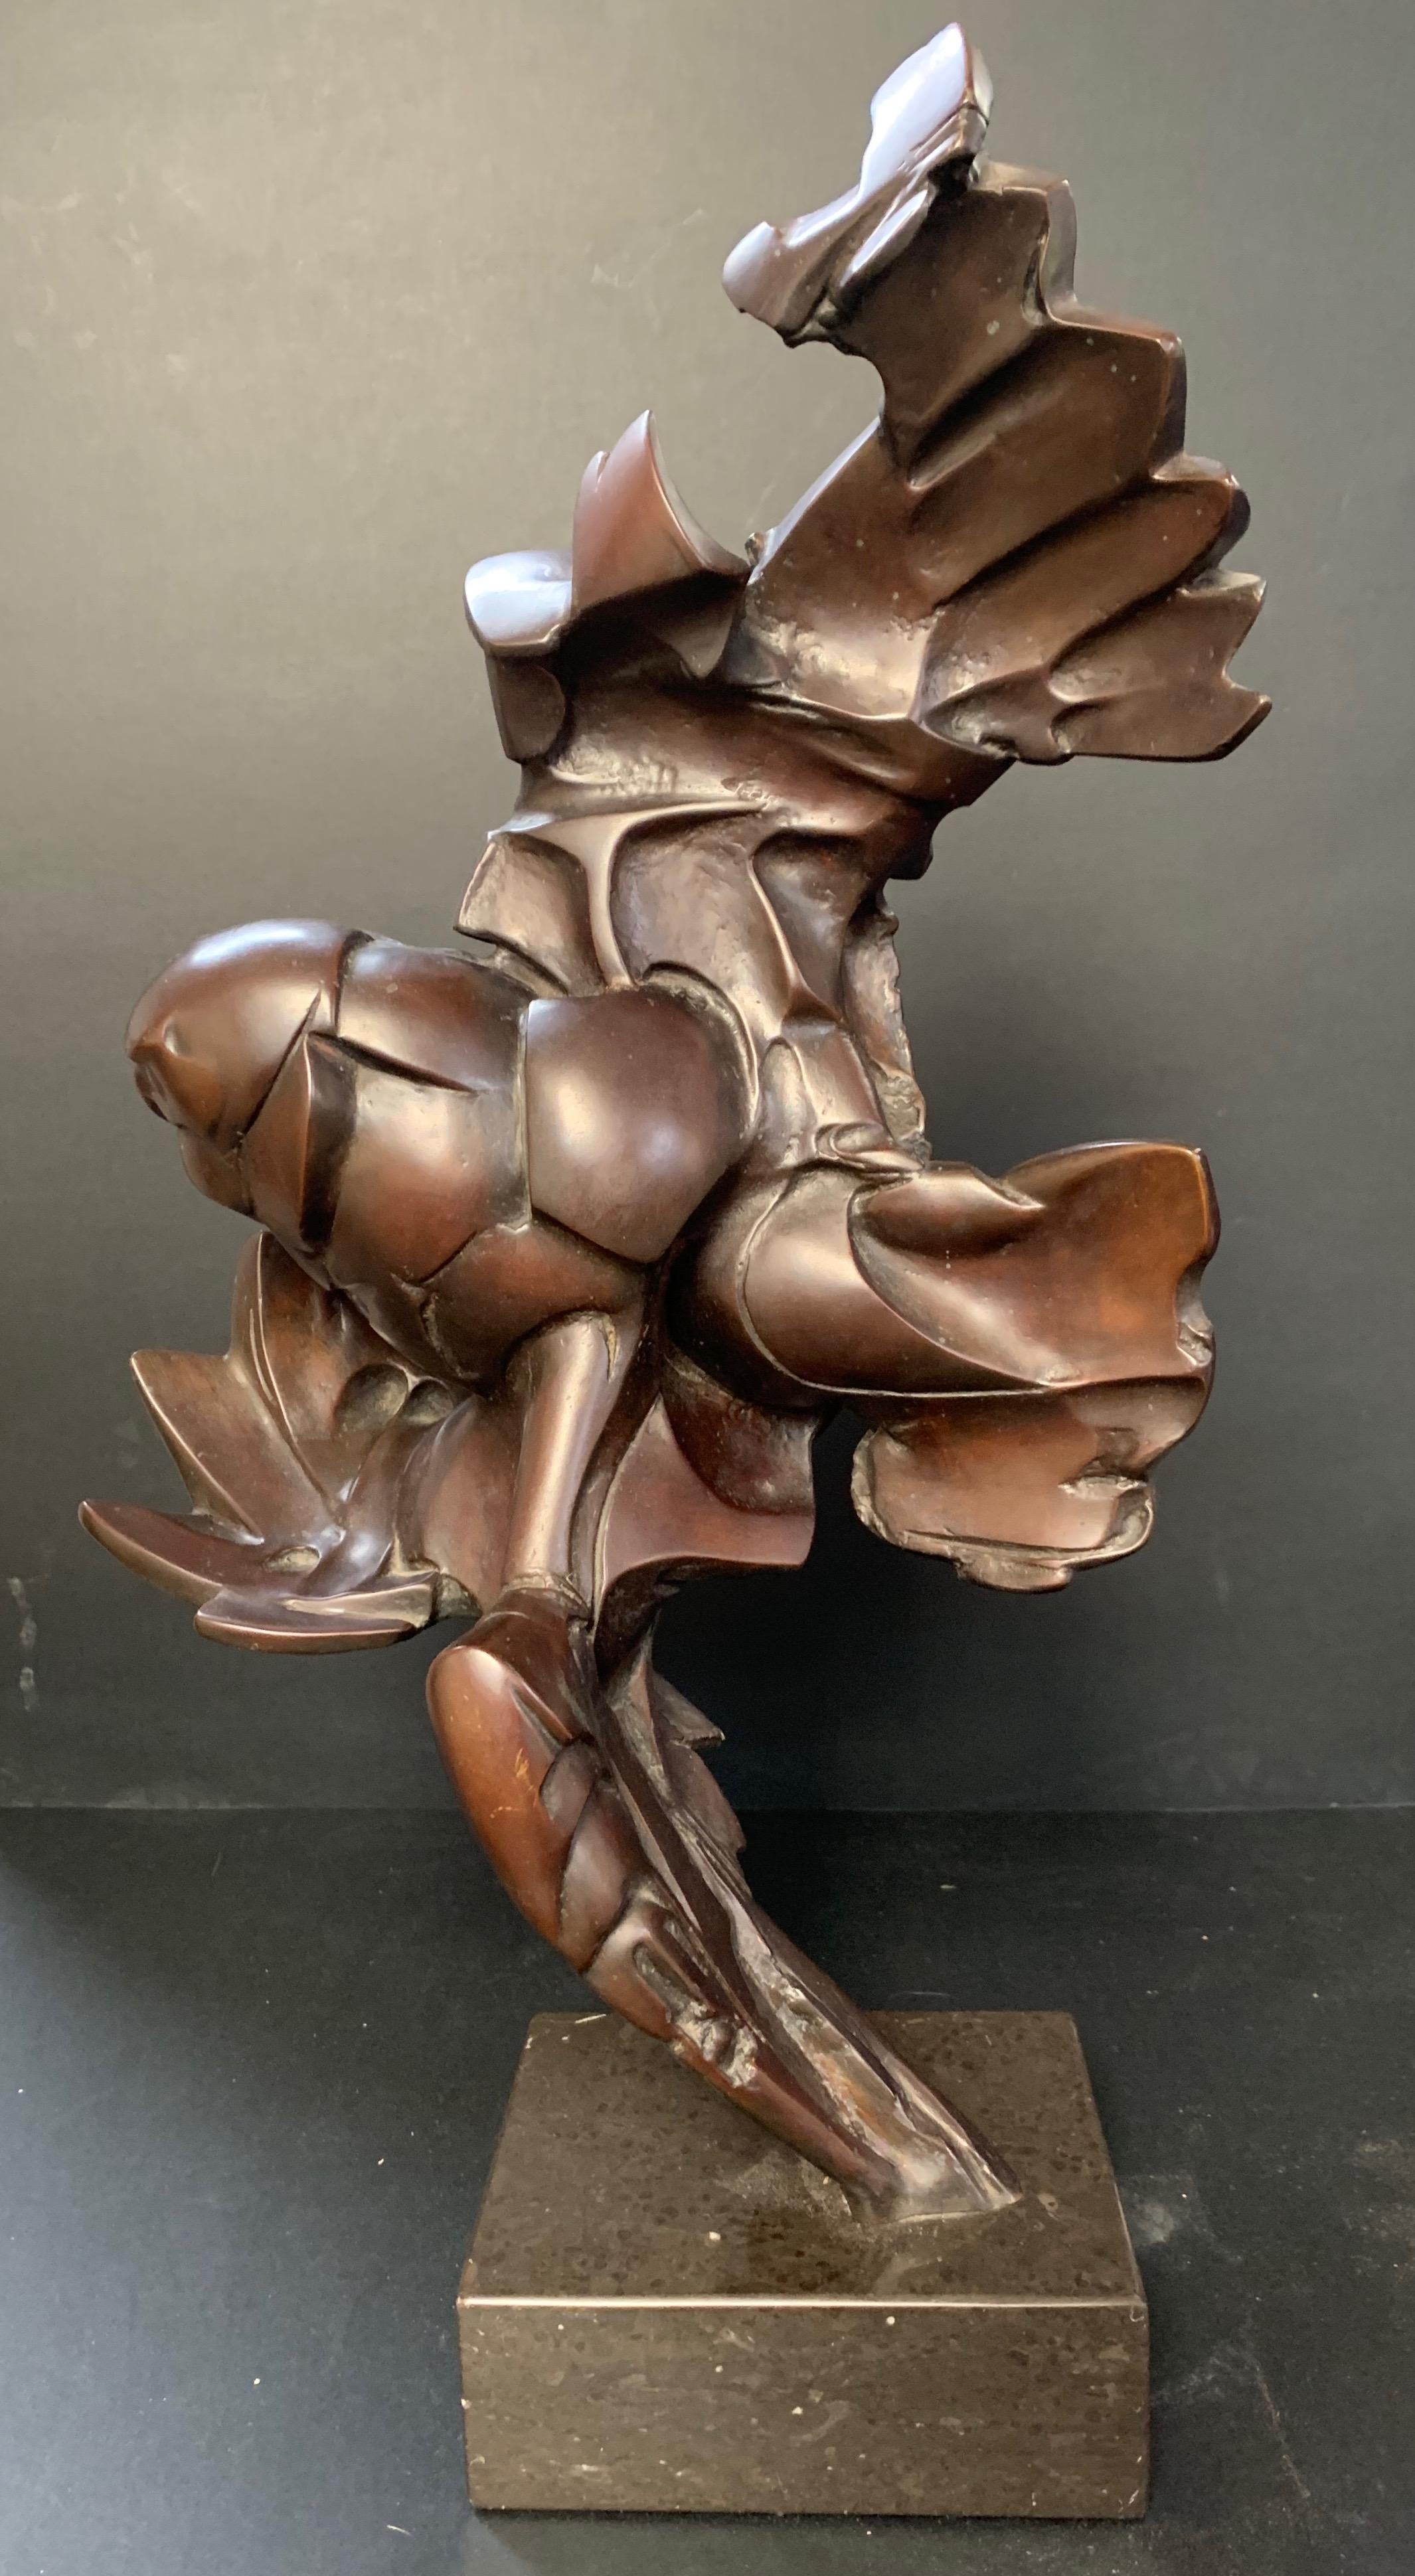 This piece is a bronze sculpture created by Riho Kuld in 1990. Kuld was born in Estonia in 1936, his work is exhibited in the museums all over the world in countries such as Estonia, Moscow, Ulyanovsk, Frane, Spain and also Finland. This piece is